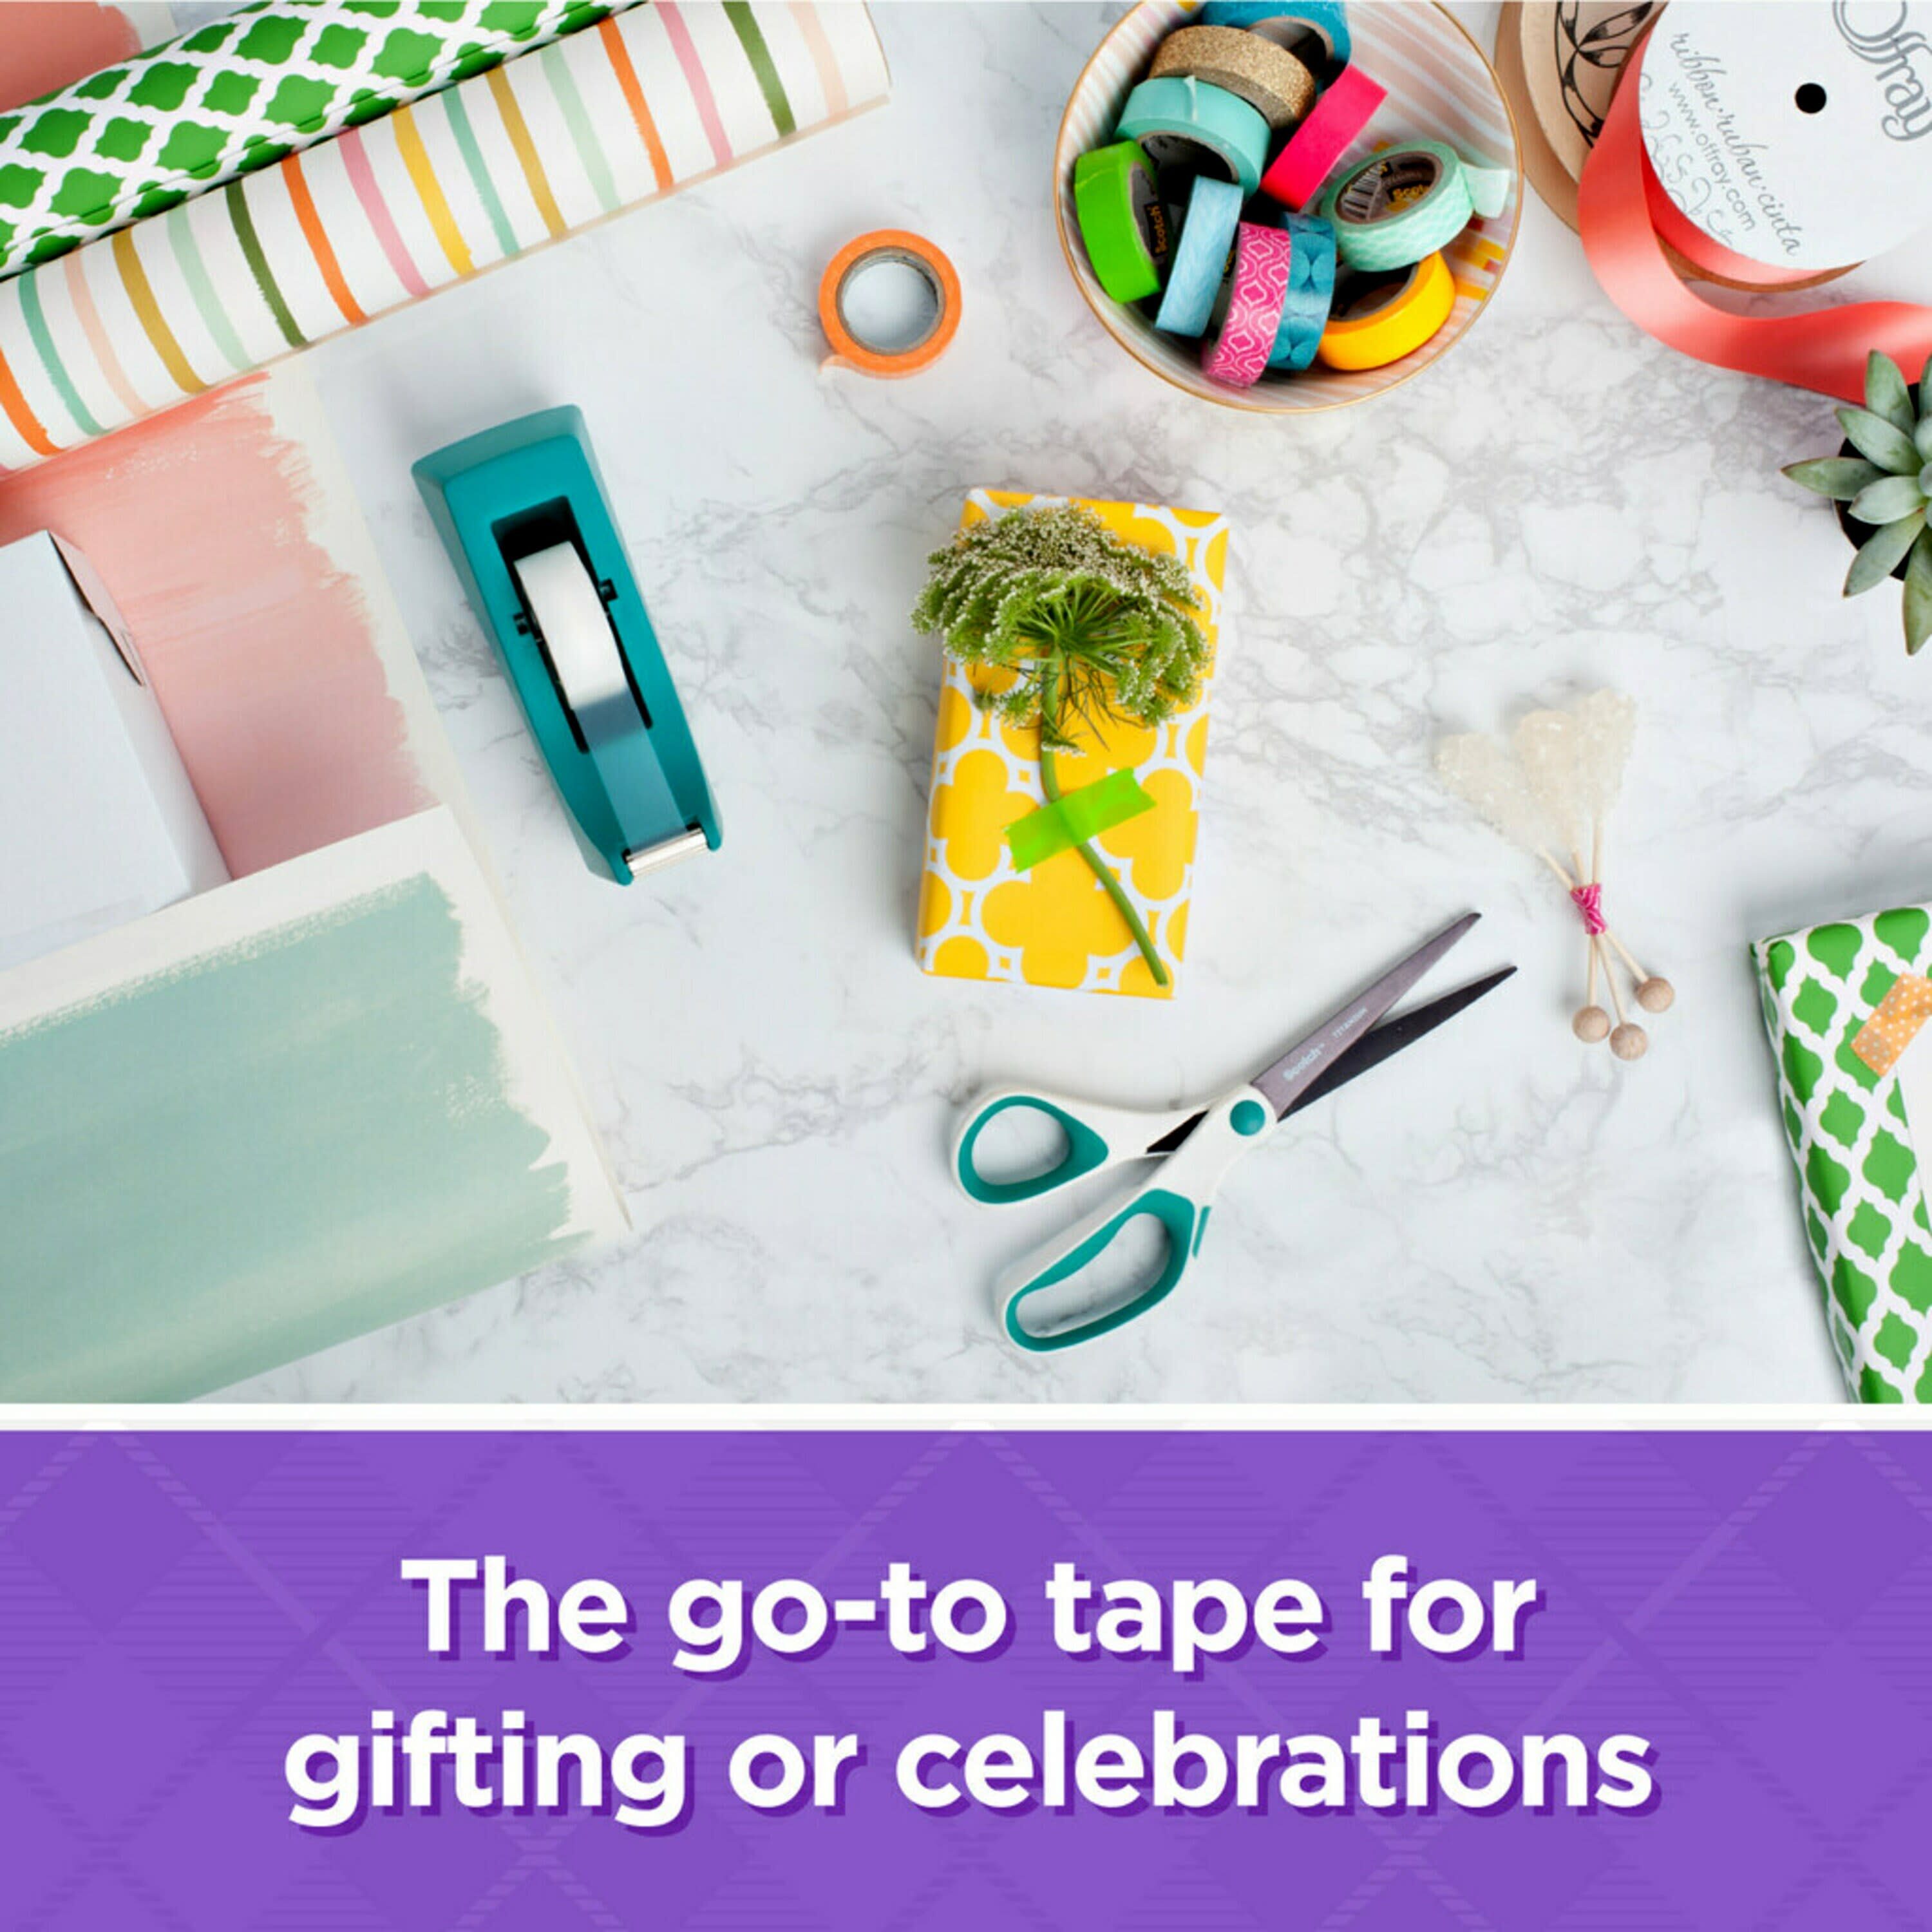 Lowest Price: Scotch Gift Wrapping Pack, Includes Gift-Wrap Tape,  Multi-Purpose Scissors, Expressions Washi Tape